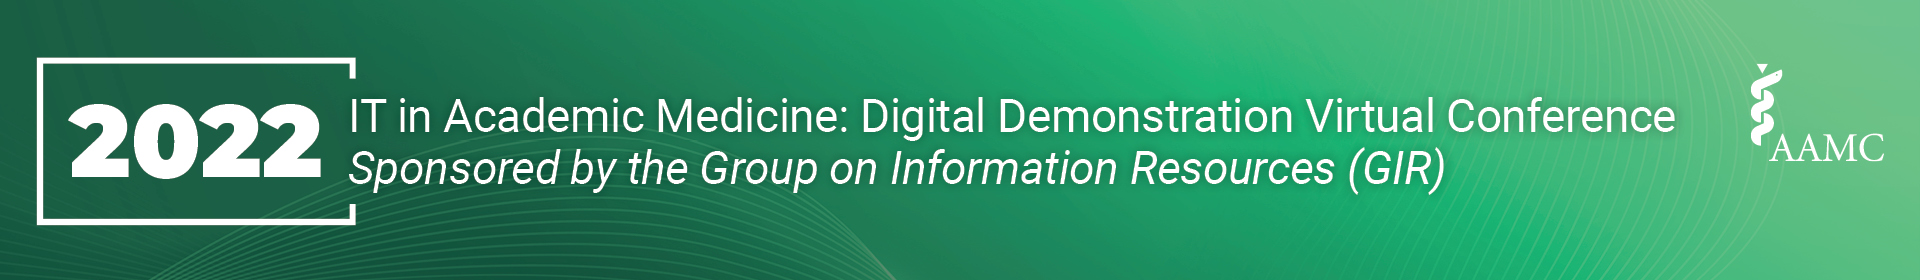 IT in Academic Medicine: Digital Demonstration Virtual Conference, Sponsored by the GIR Event Banner